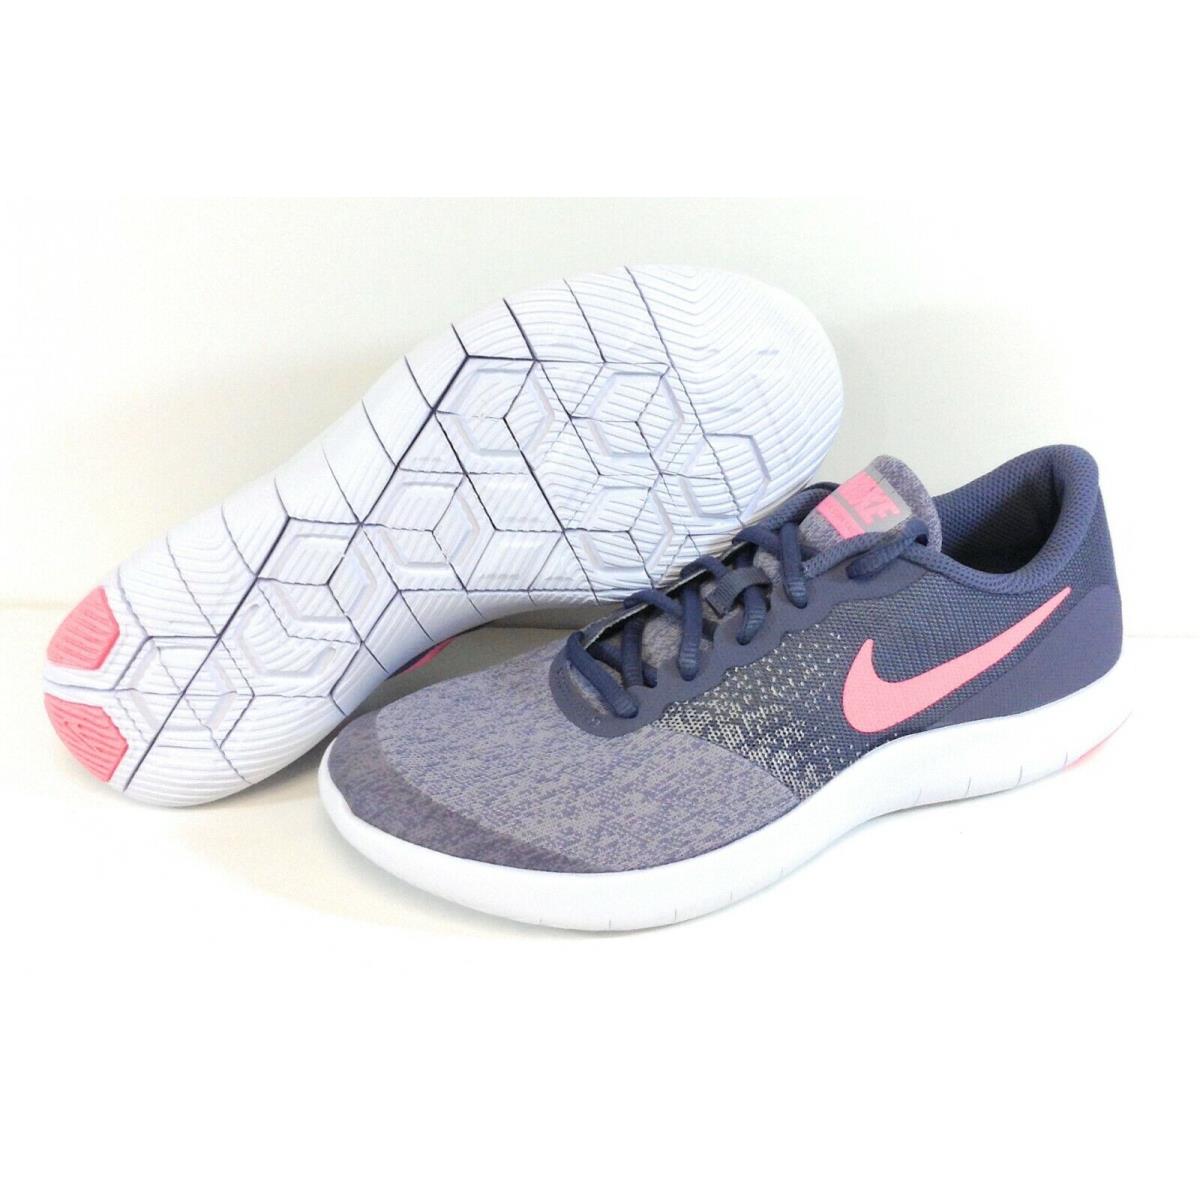 Girls Kids Youth Nike Flex Contact 917937 003 Grey Pink White Sneakers Shoes - Grey